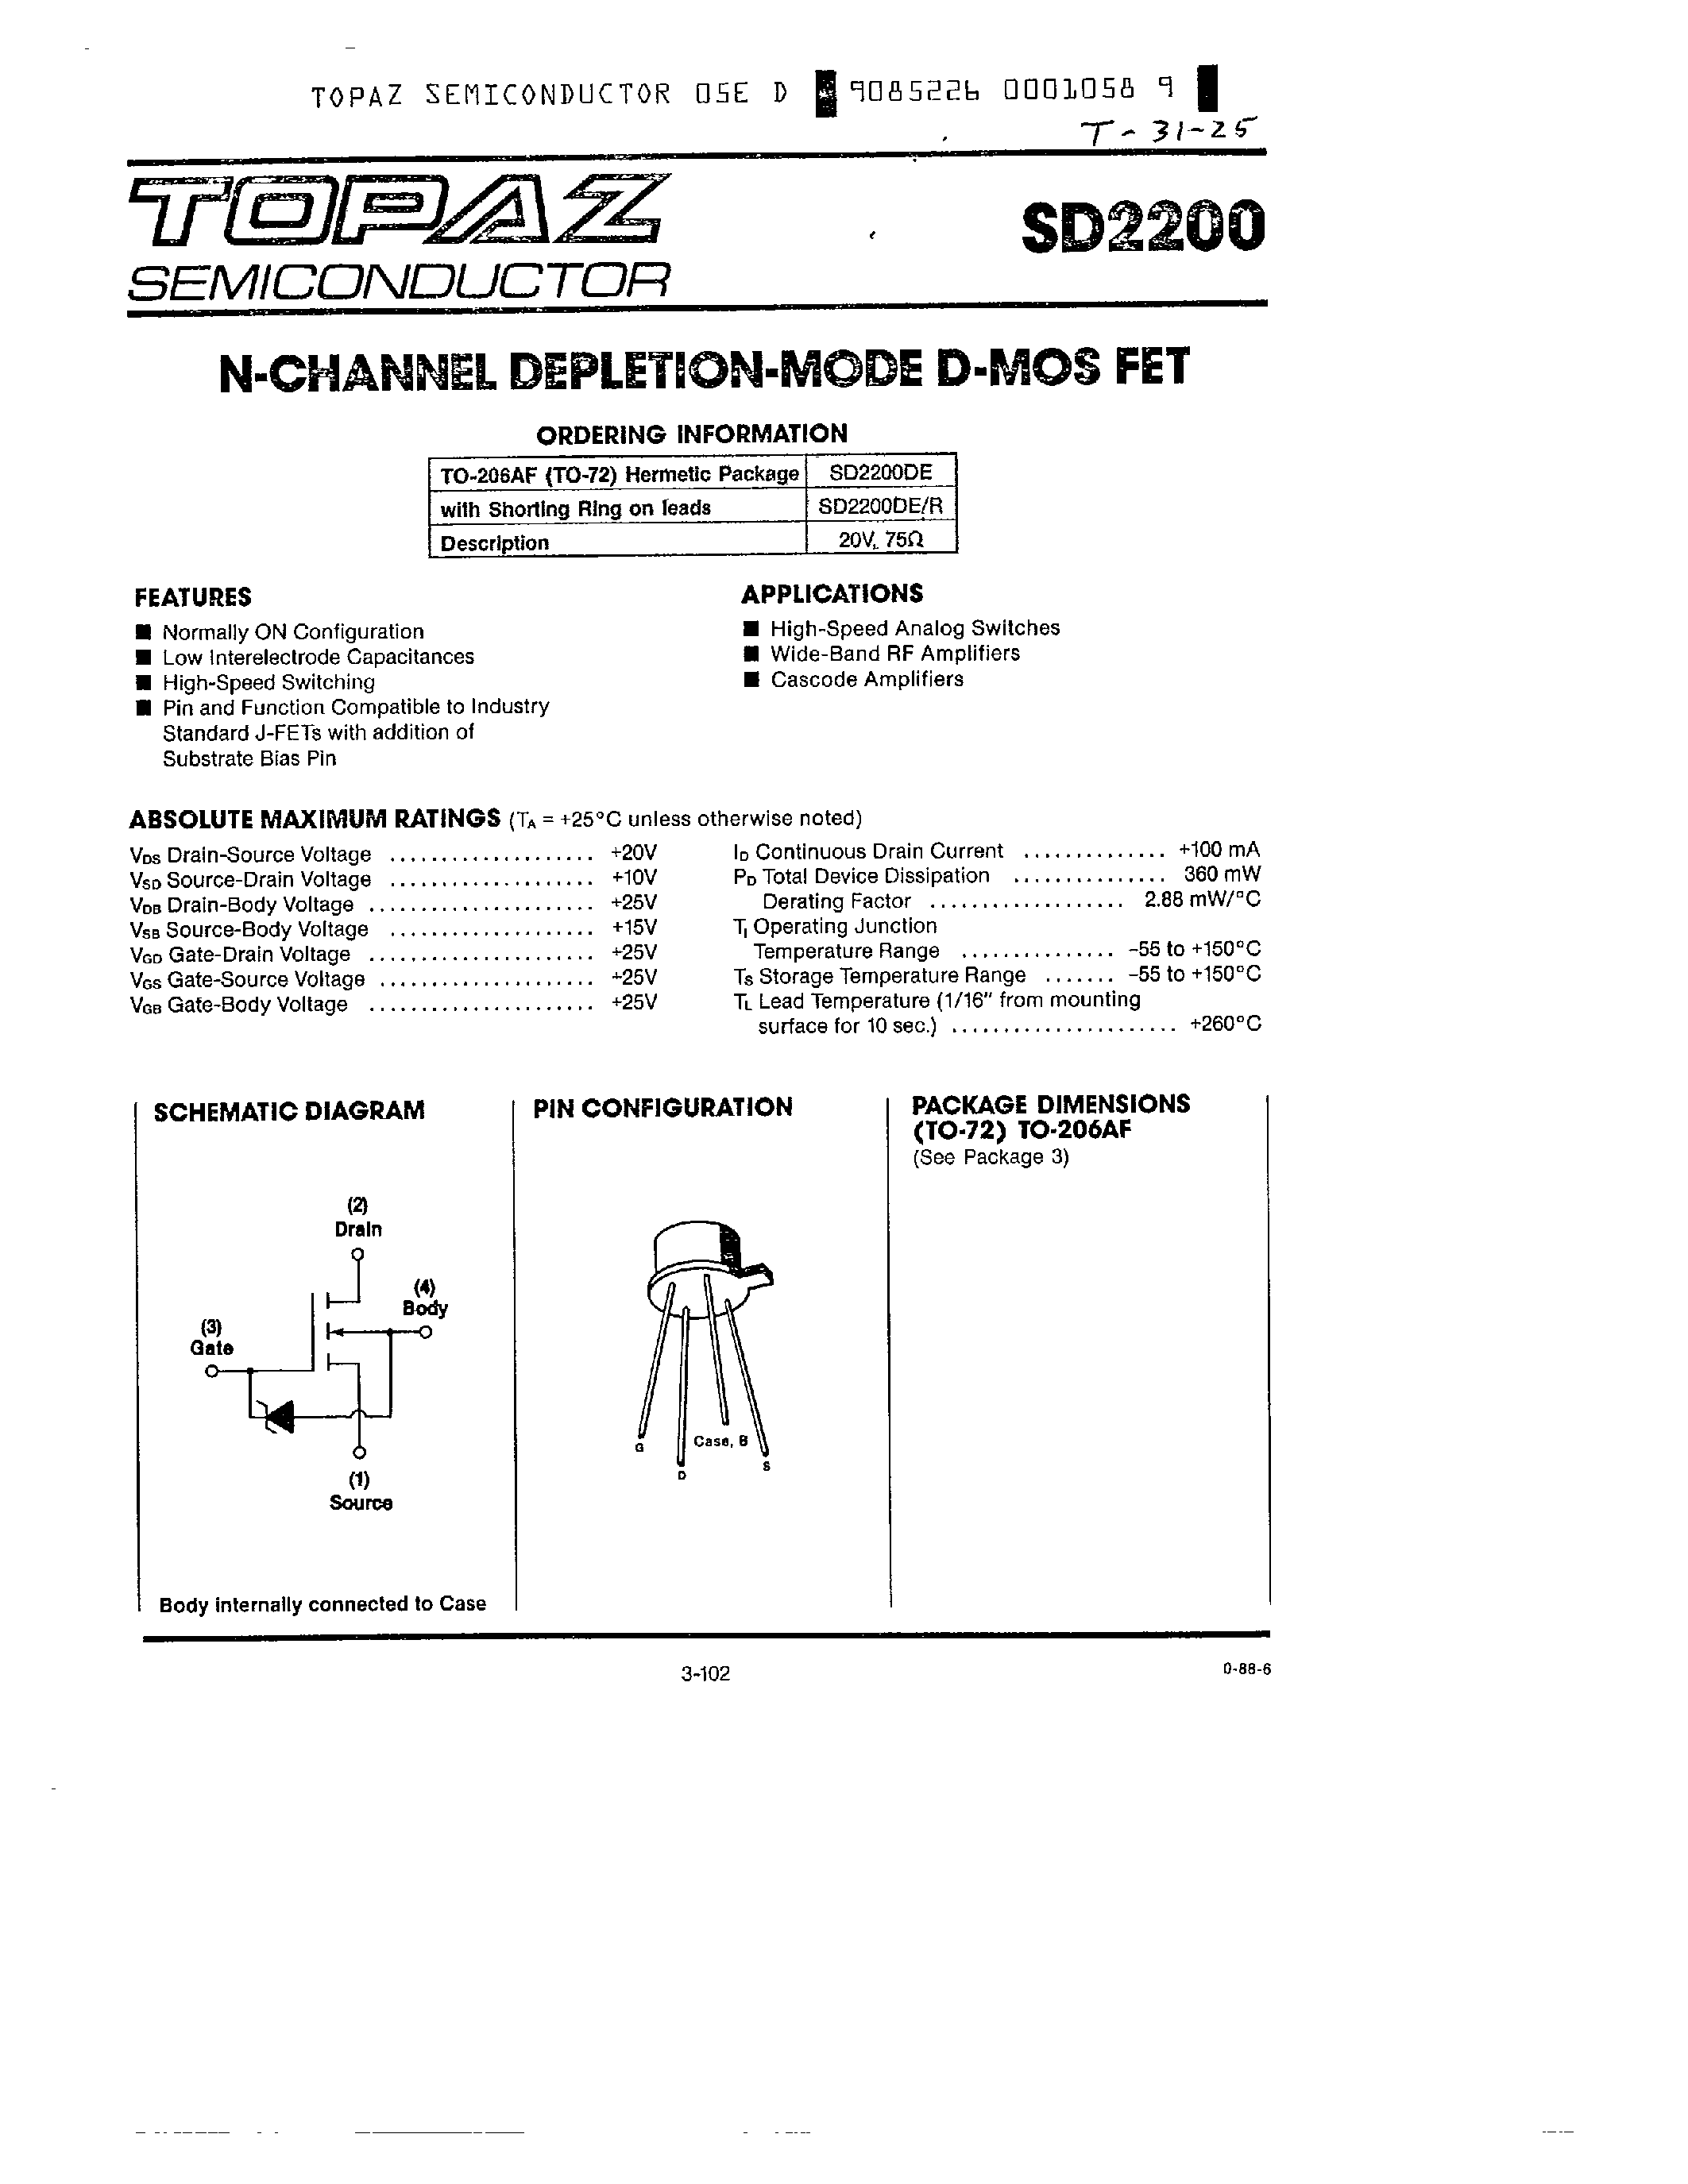 Datasheet SD2200 - N-CHANNEL DEPLETION-MODE D-MOS FET page 1